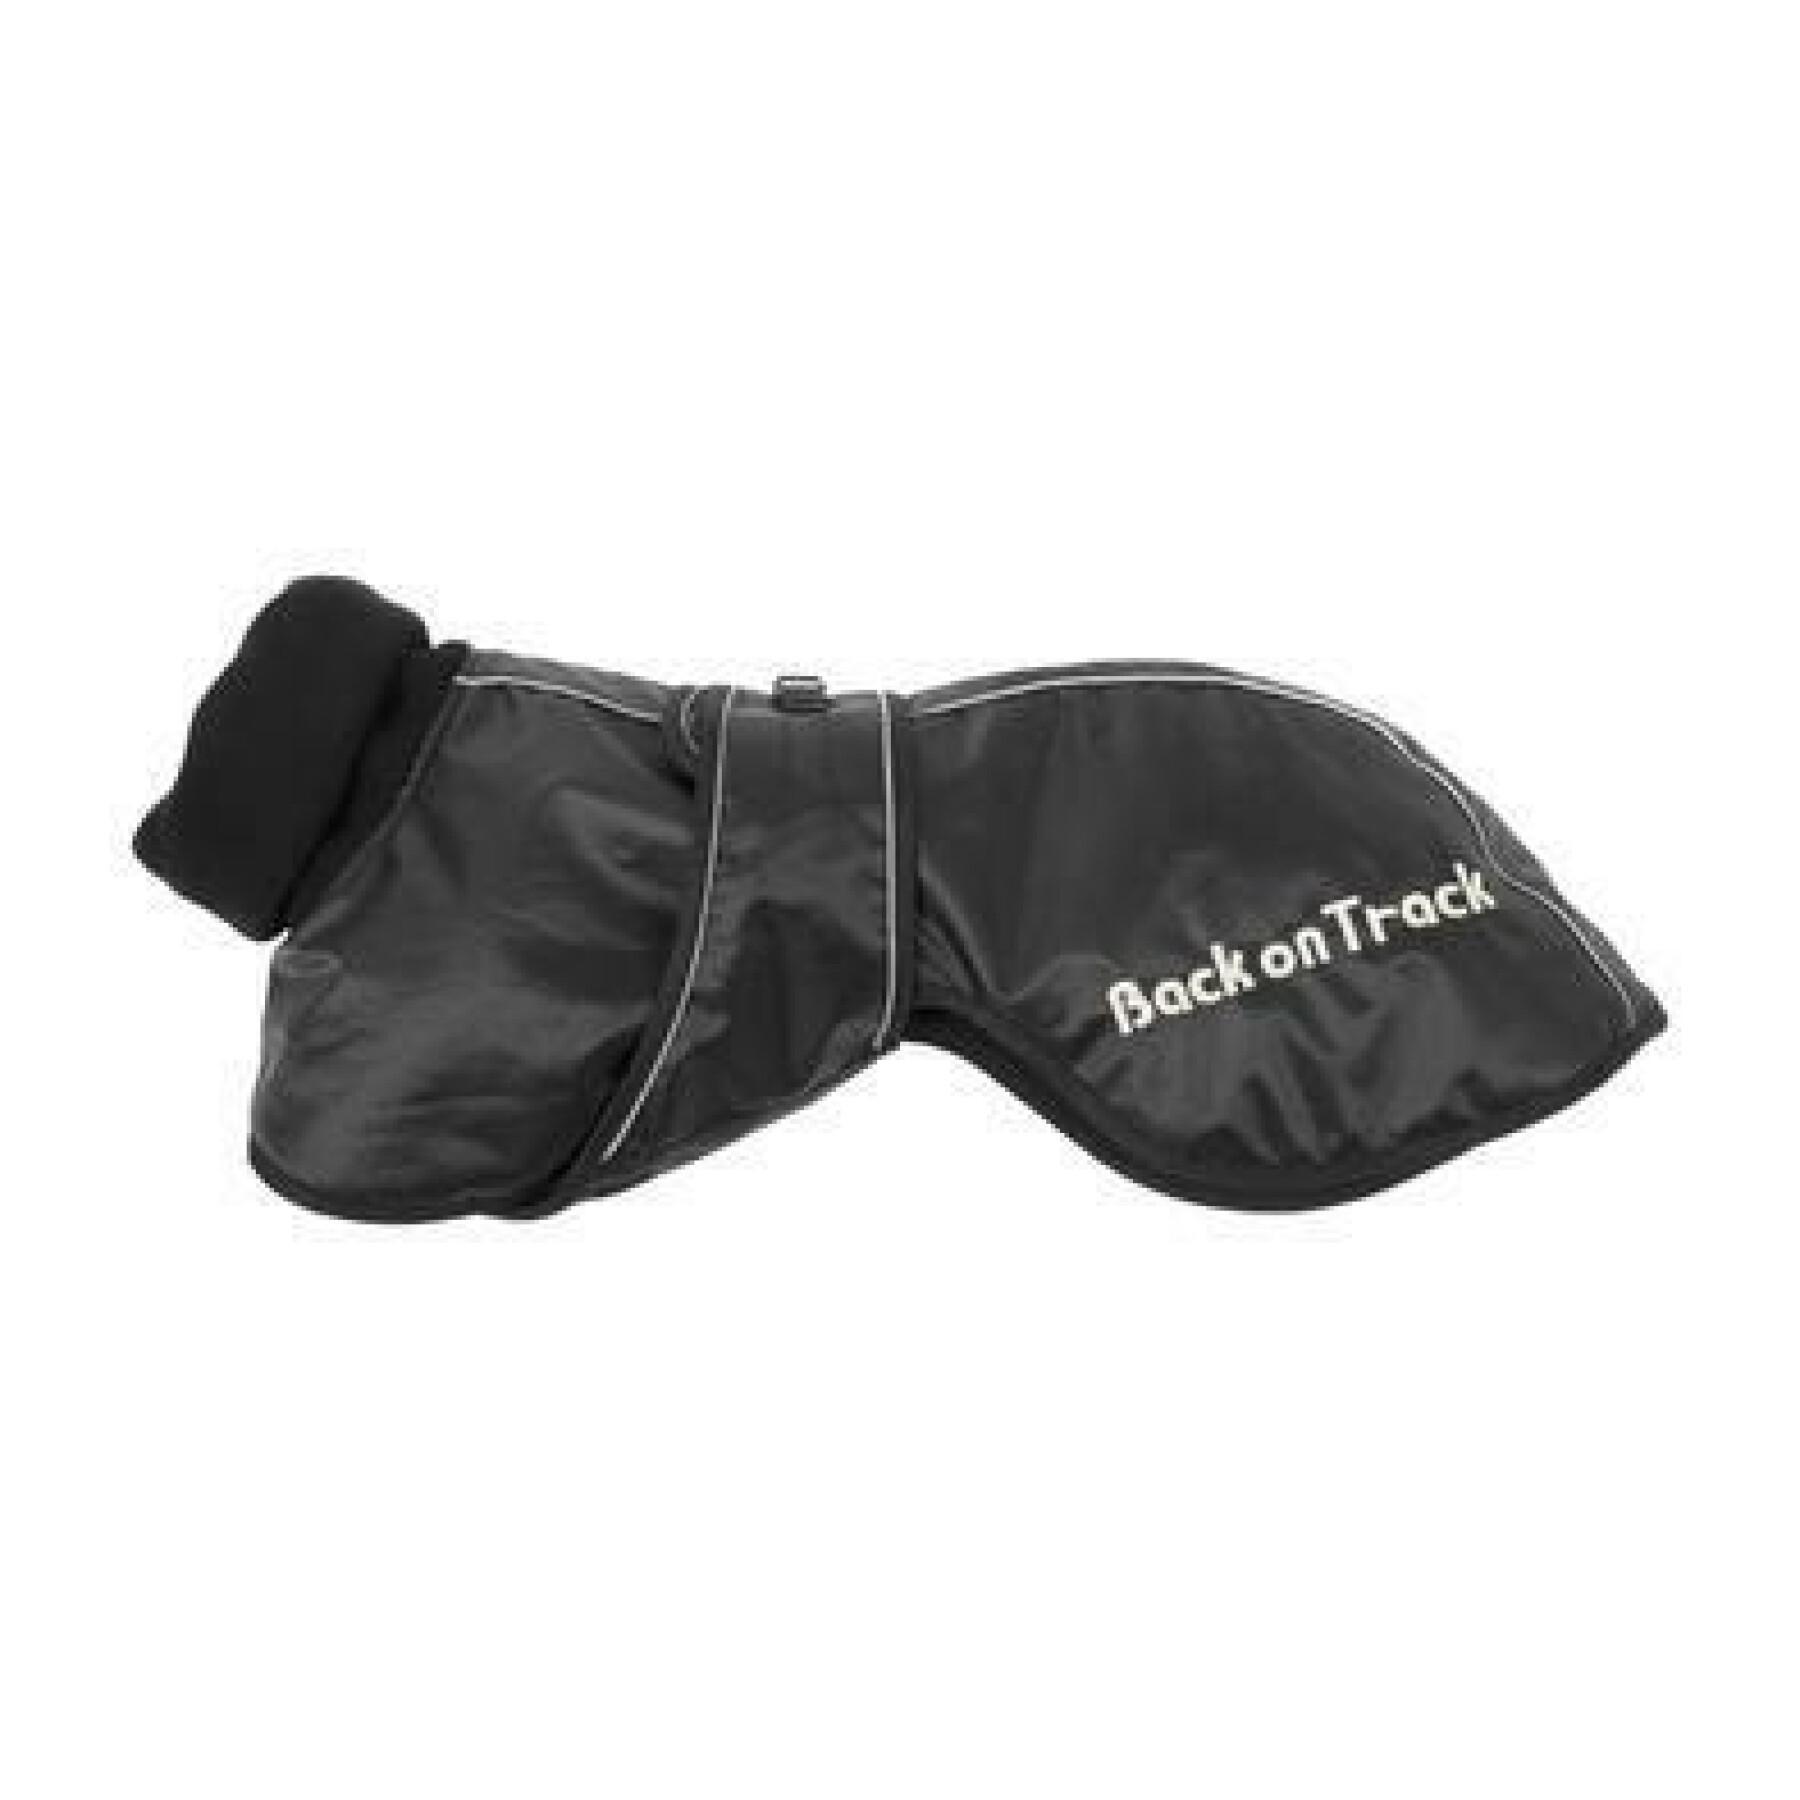 Cappottino per cani Back on Track whippet 30 cm